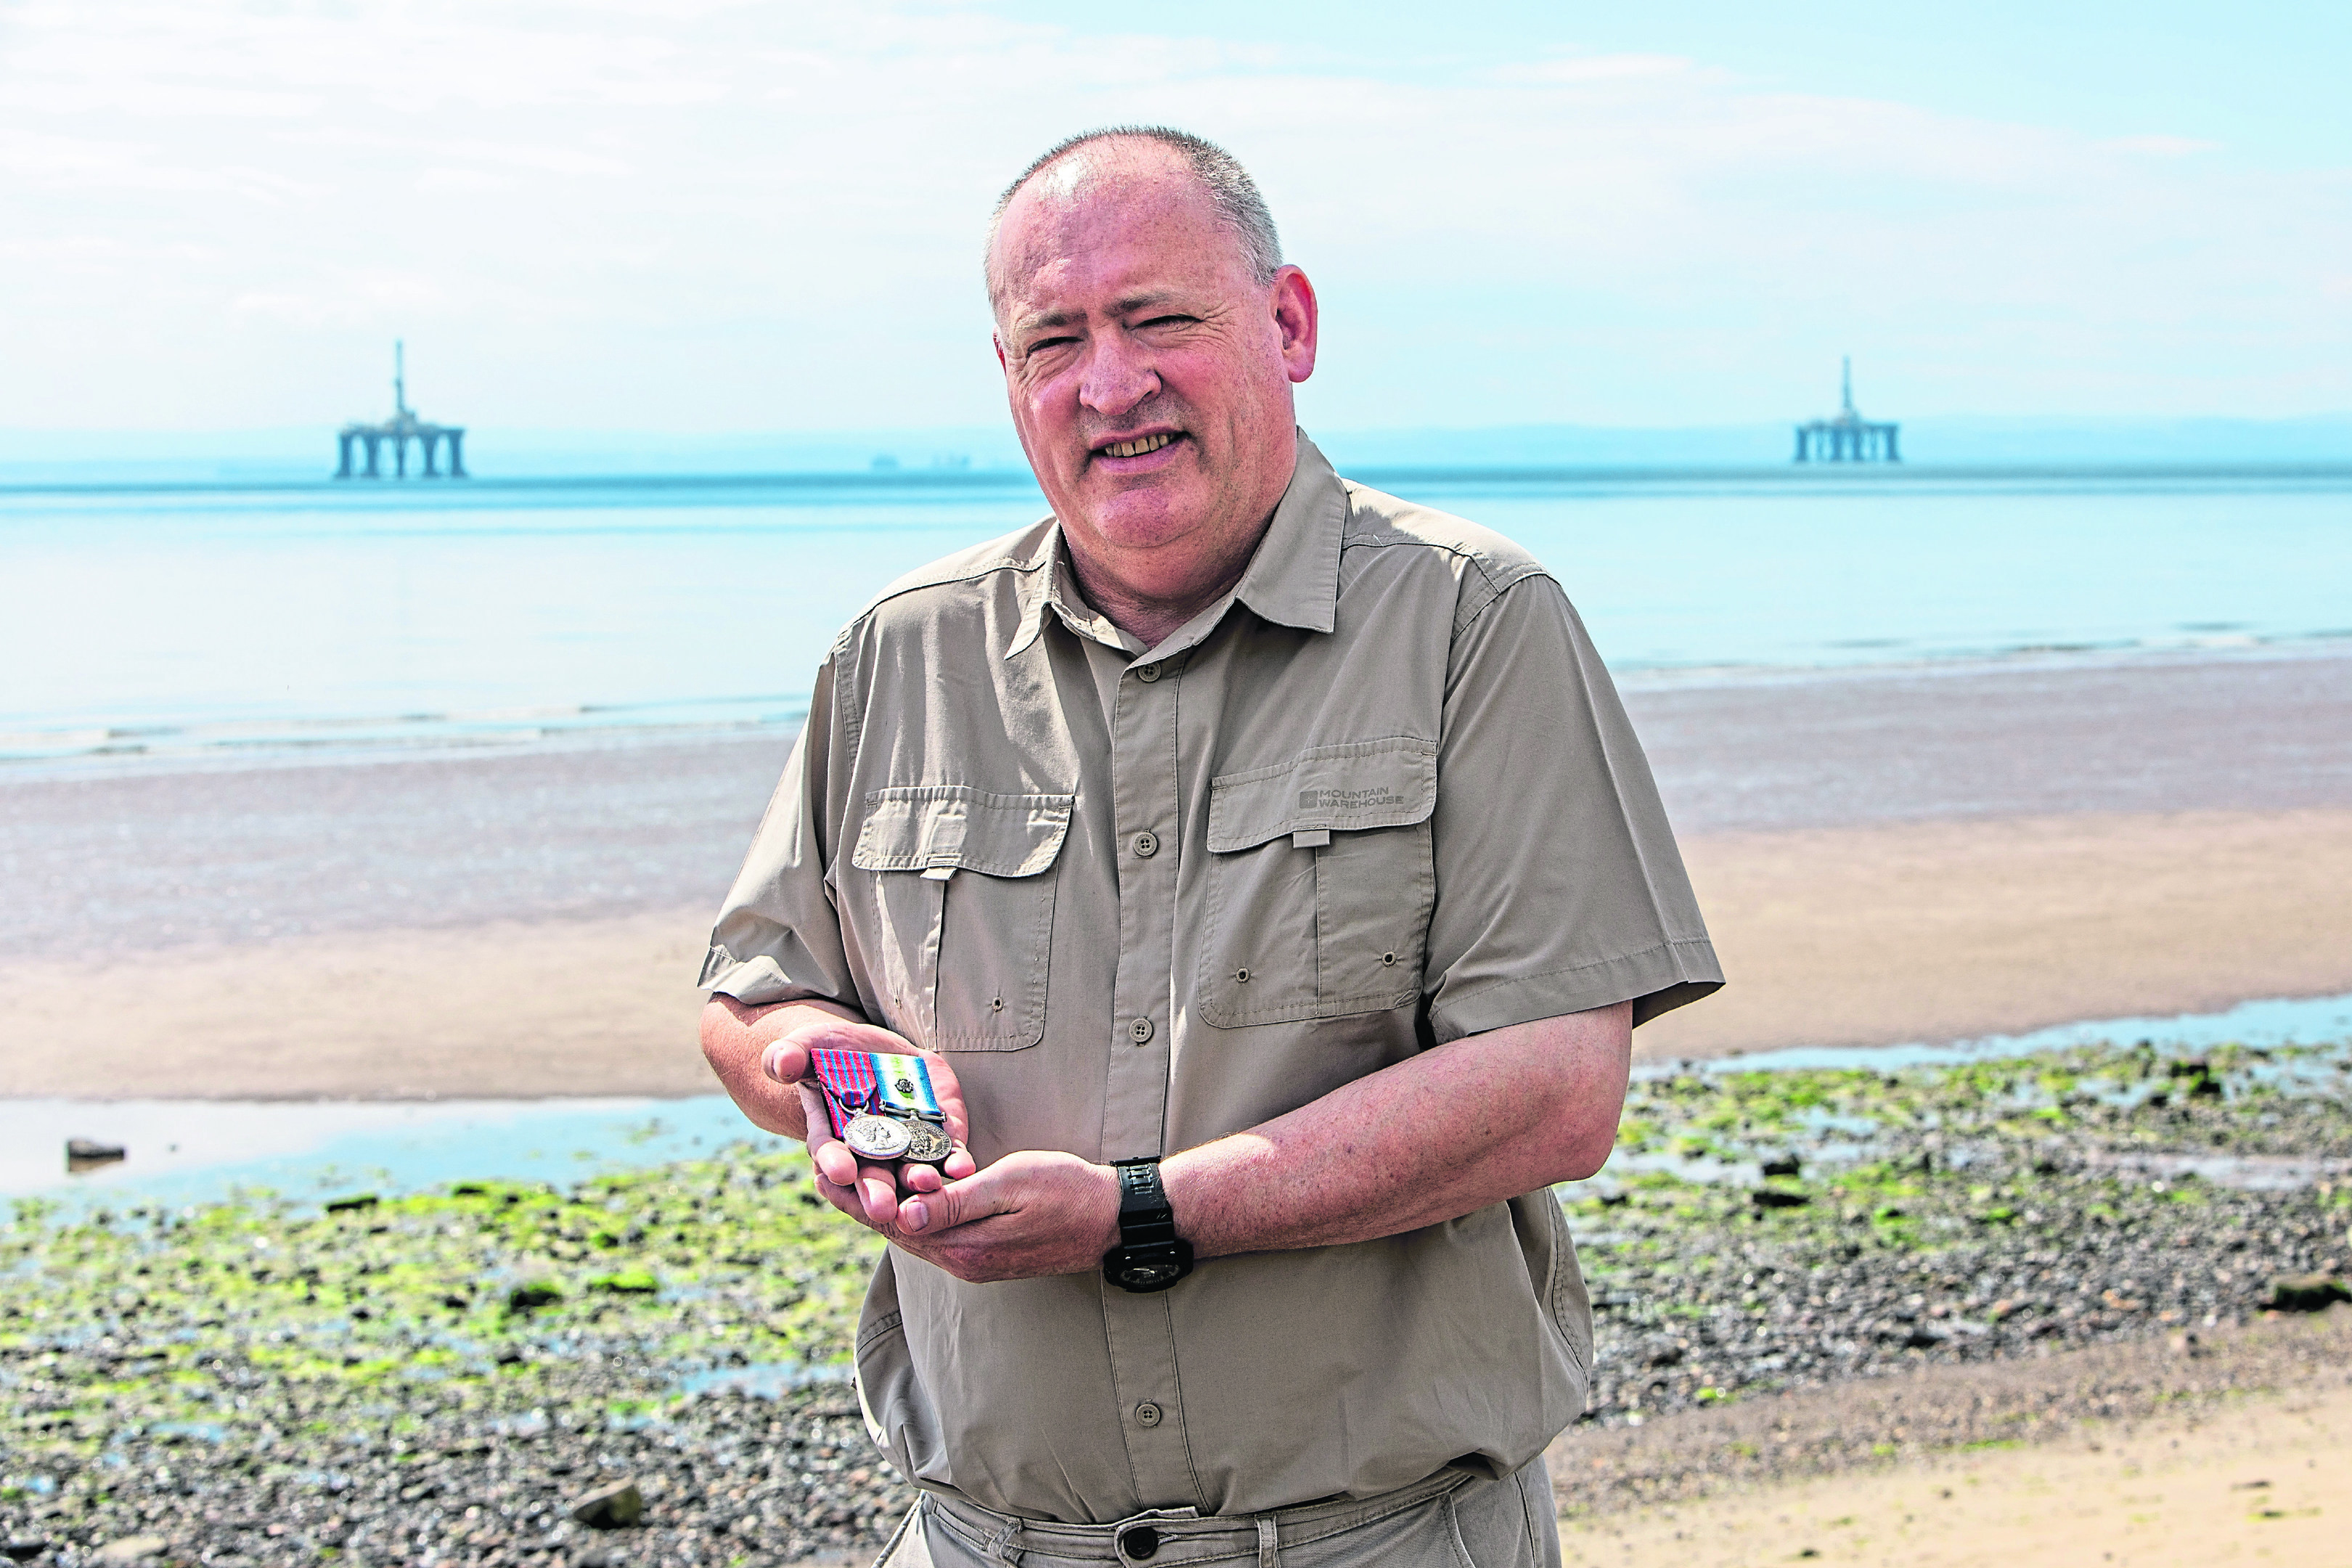 Charles Haffey (56) with his George Medal awarded for the rescues on Piper Alpha disaster  - Thursday 5th July 2018